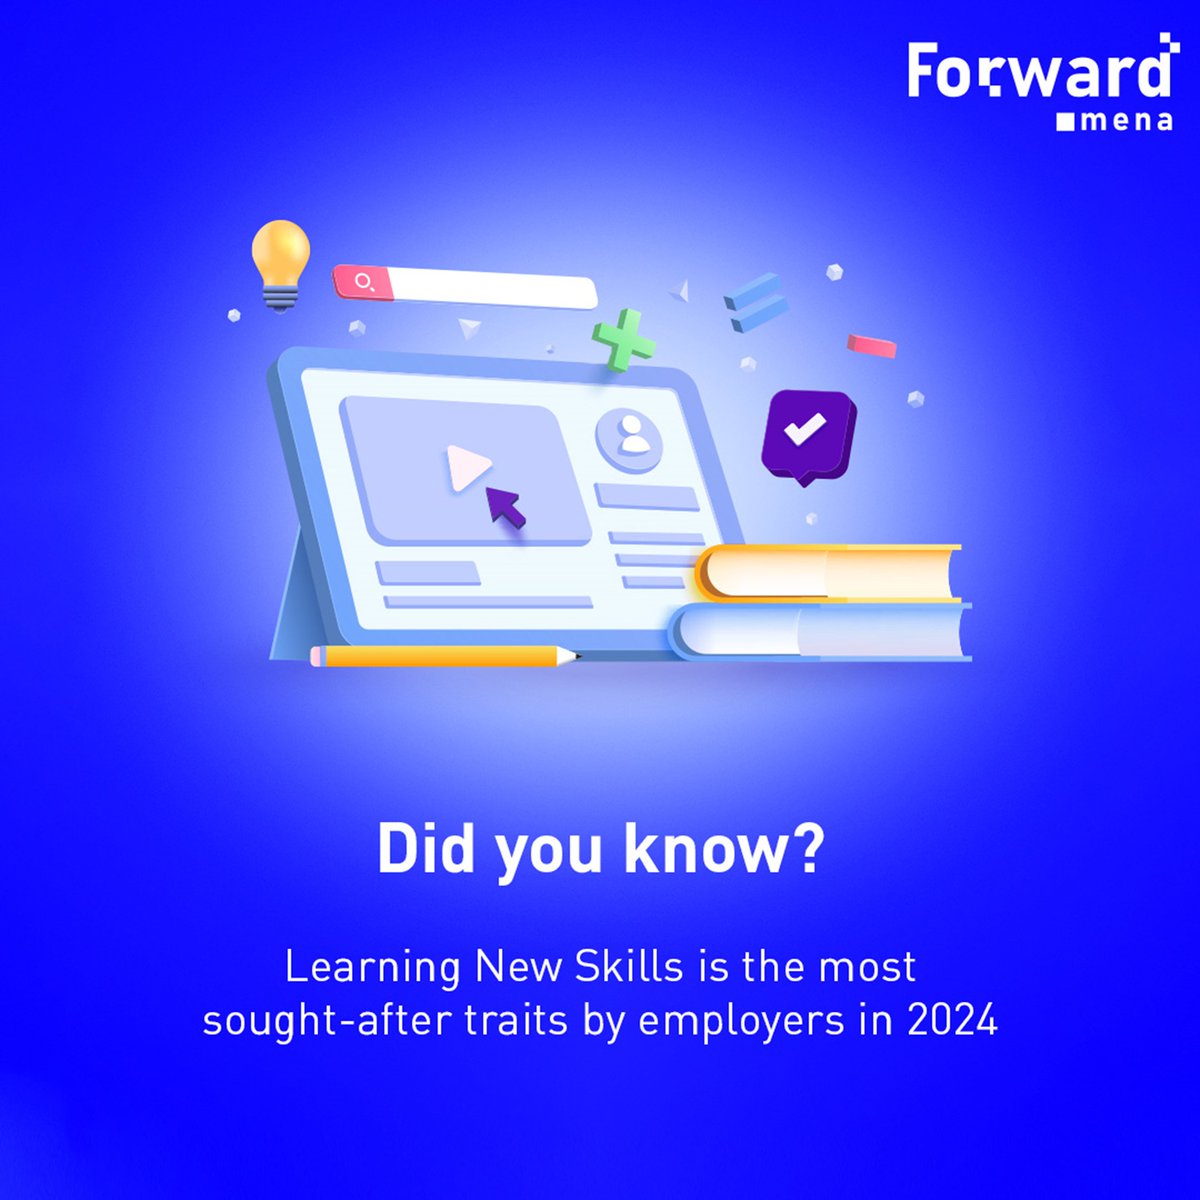 Stay ahead of the curve by embracing continuous learning. 📚💼💡

#ForwardMena #LifelongLearning #CareerDevelopment